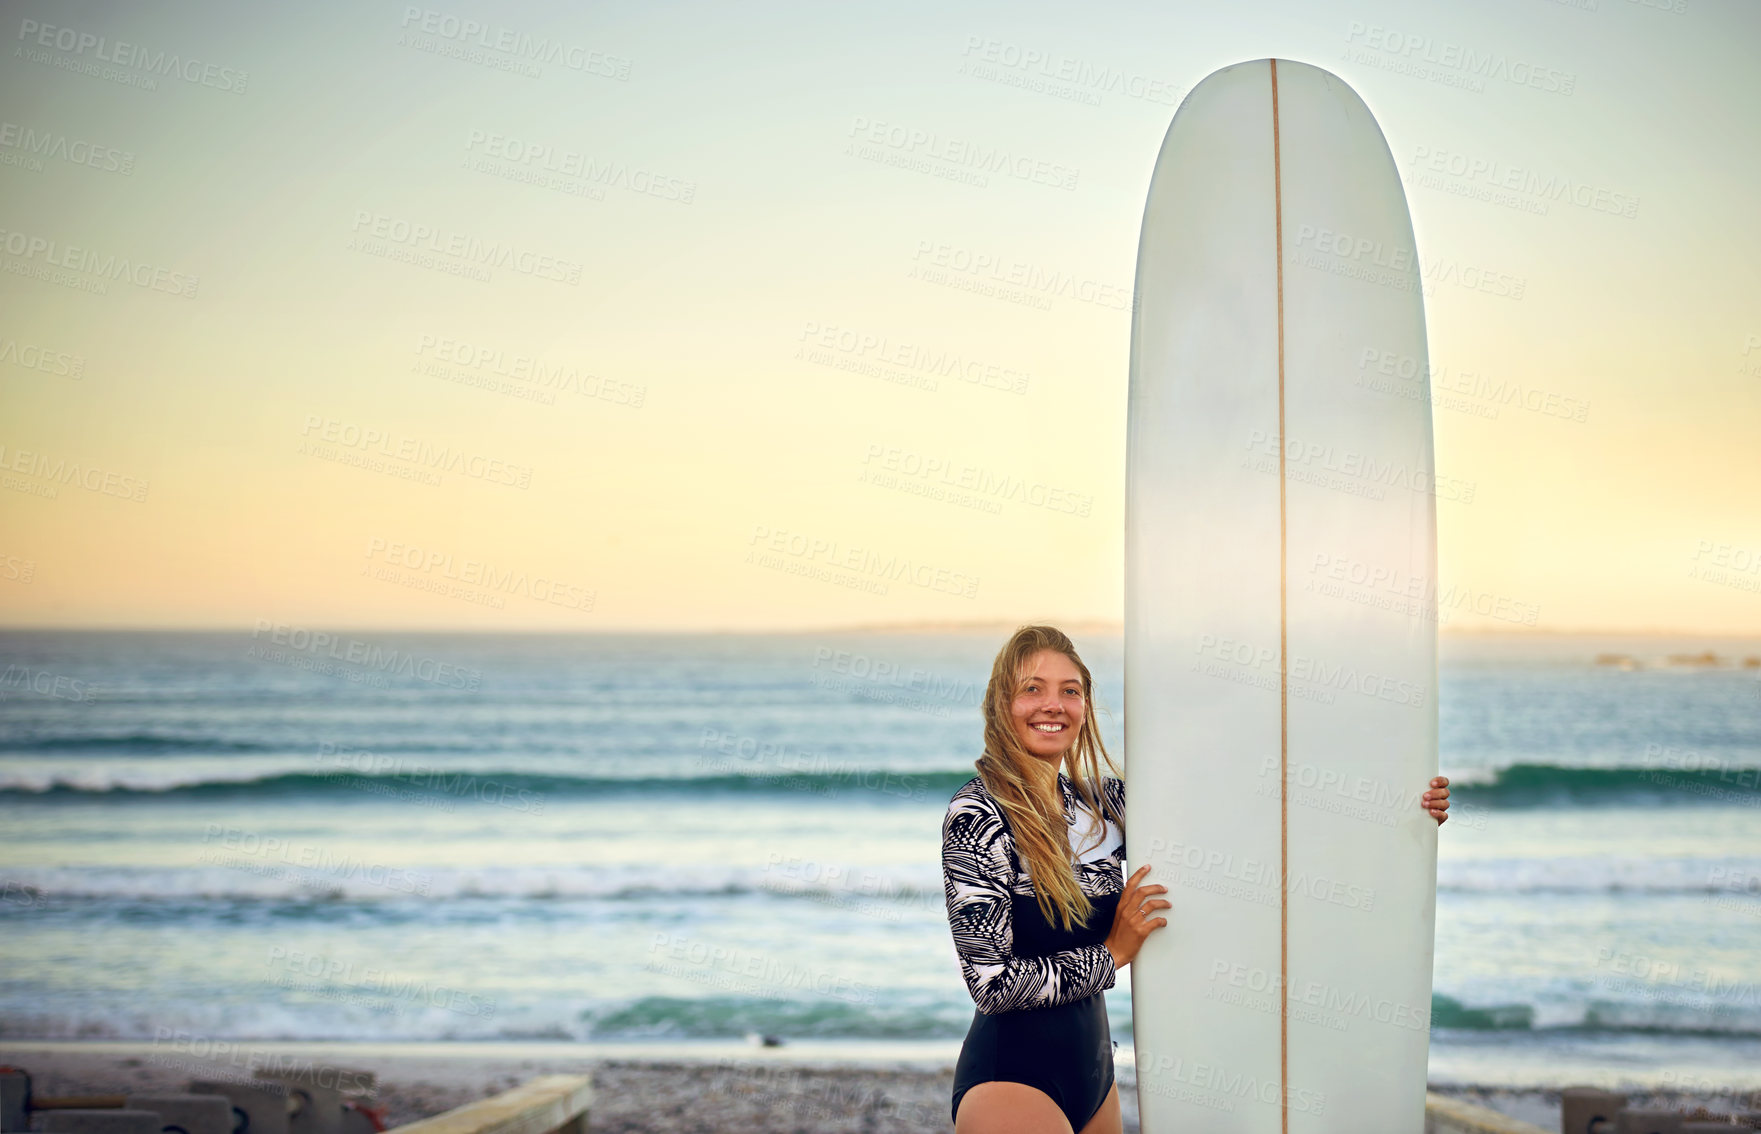 Buy stock photo Cropped portrait of an attractive young female surfer standing with her surfboard on the beach